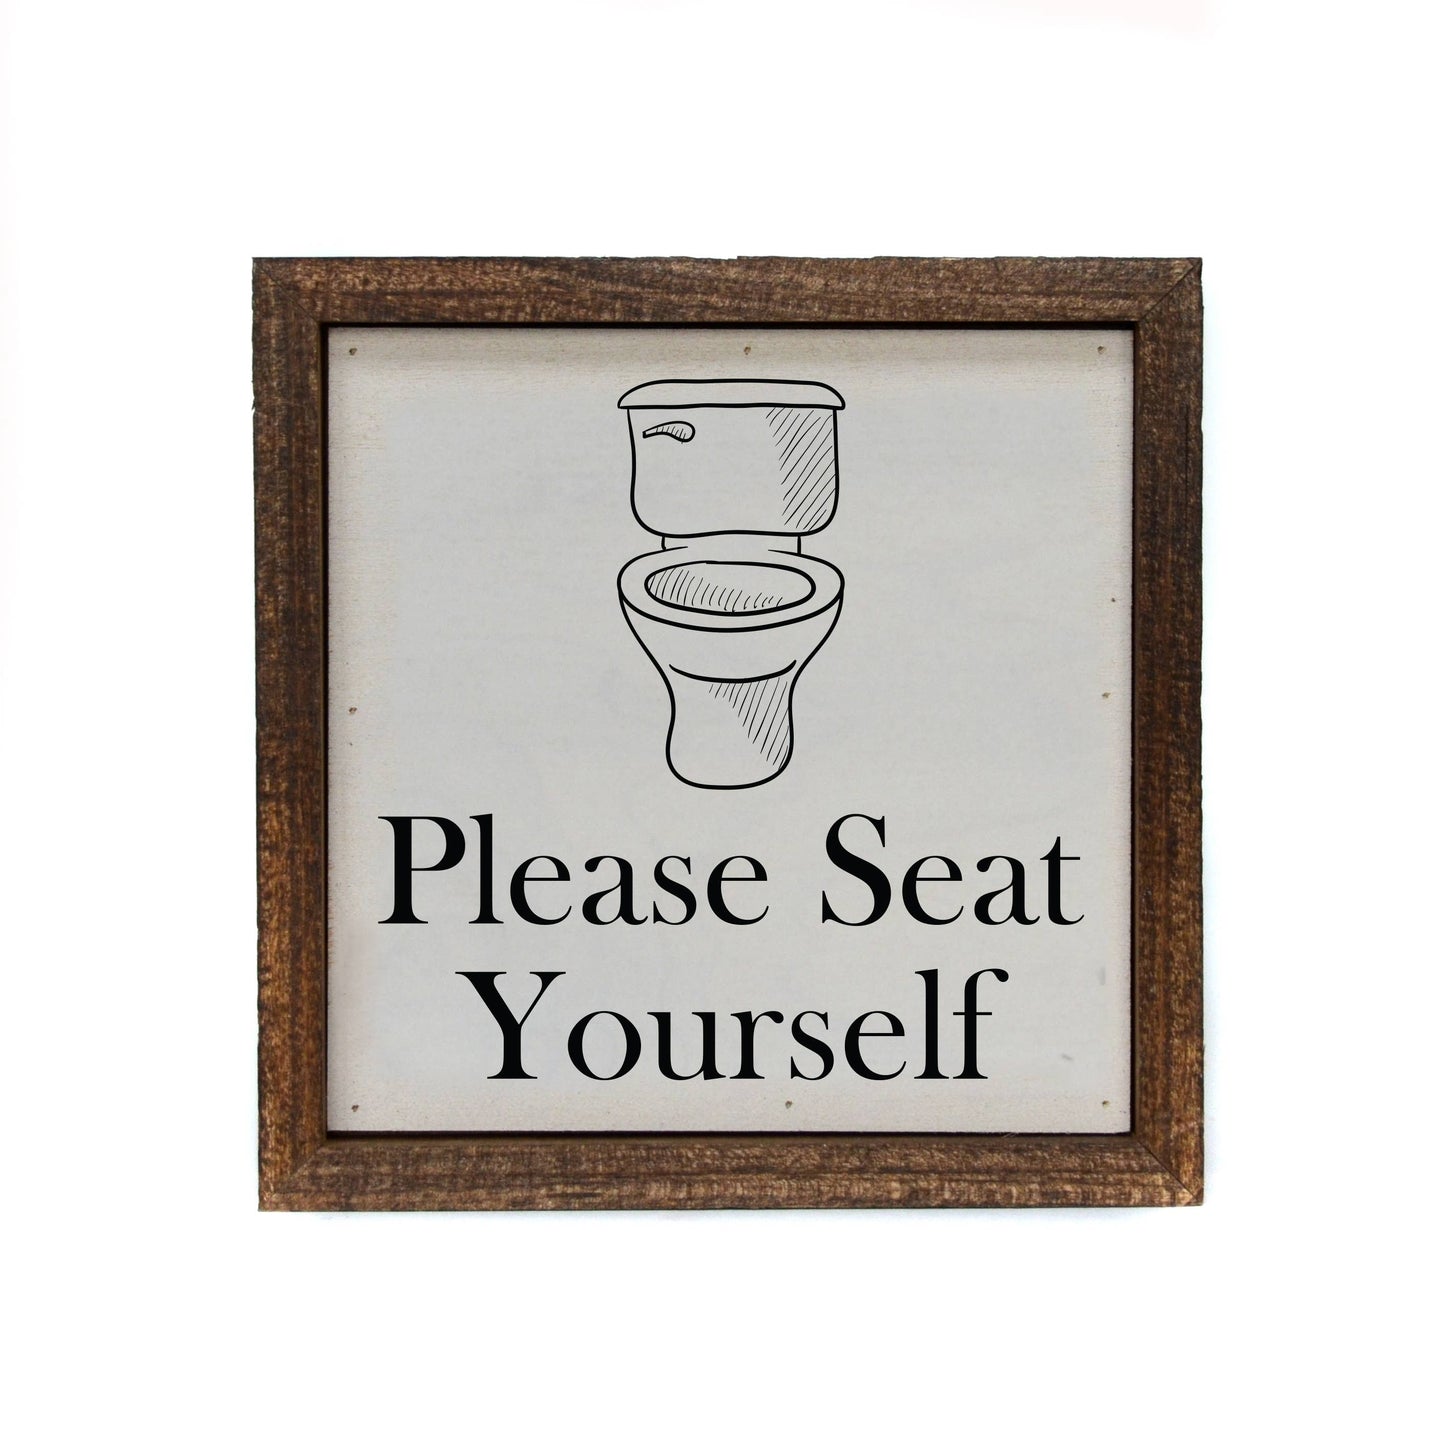 Please Seat Yourself Funny Bathroom Signs- Wooden Decor 6x6